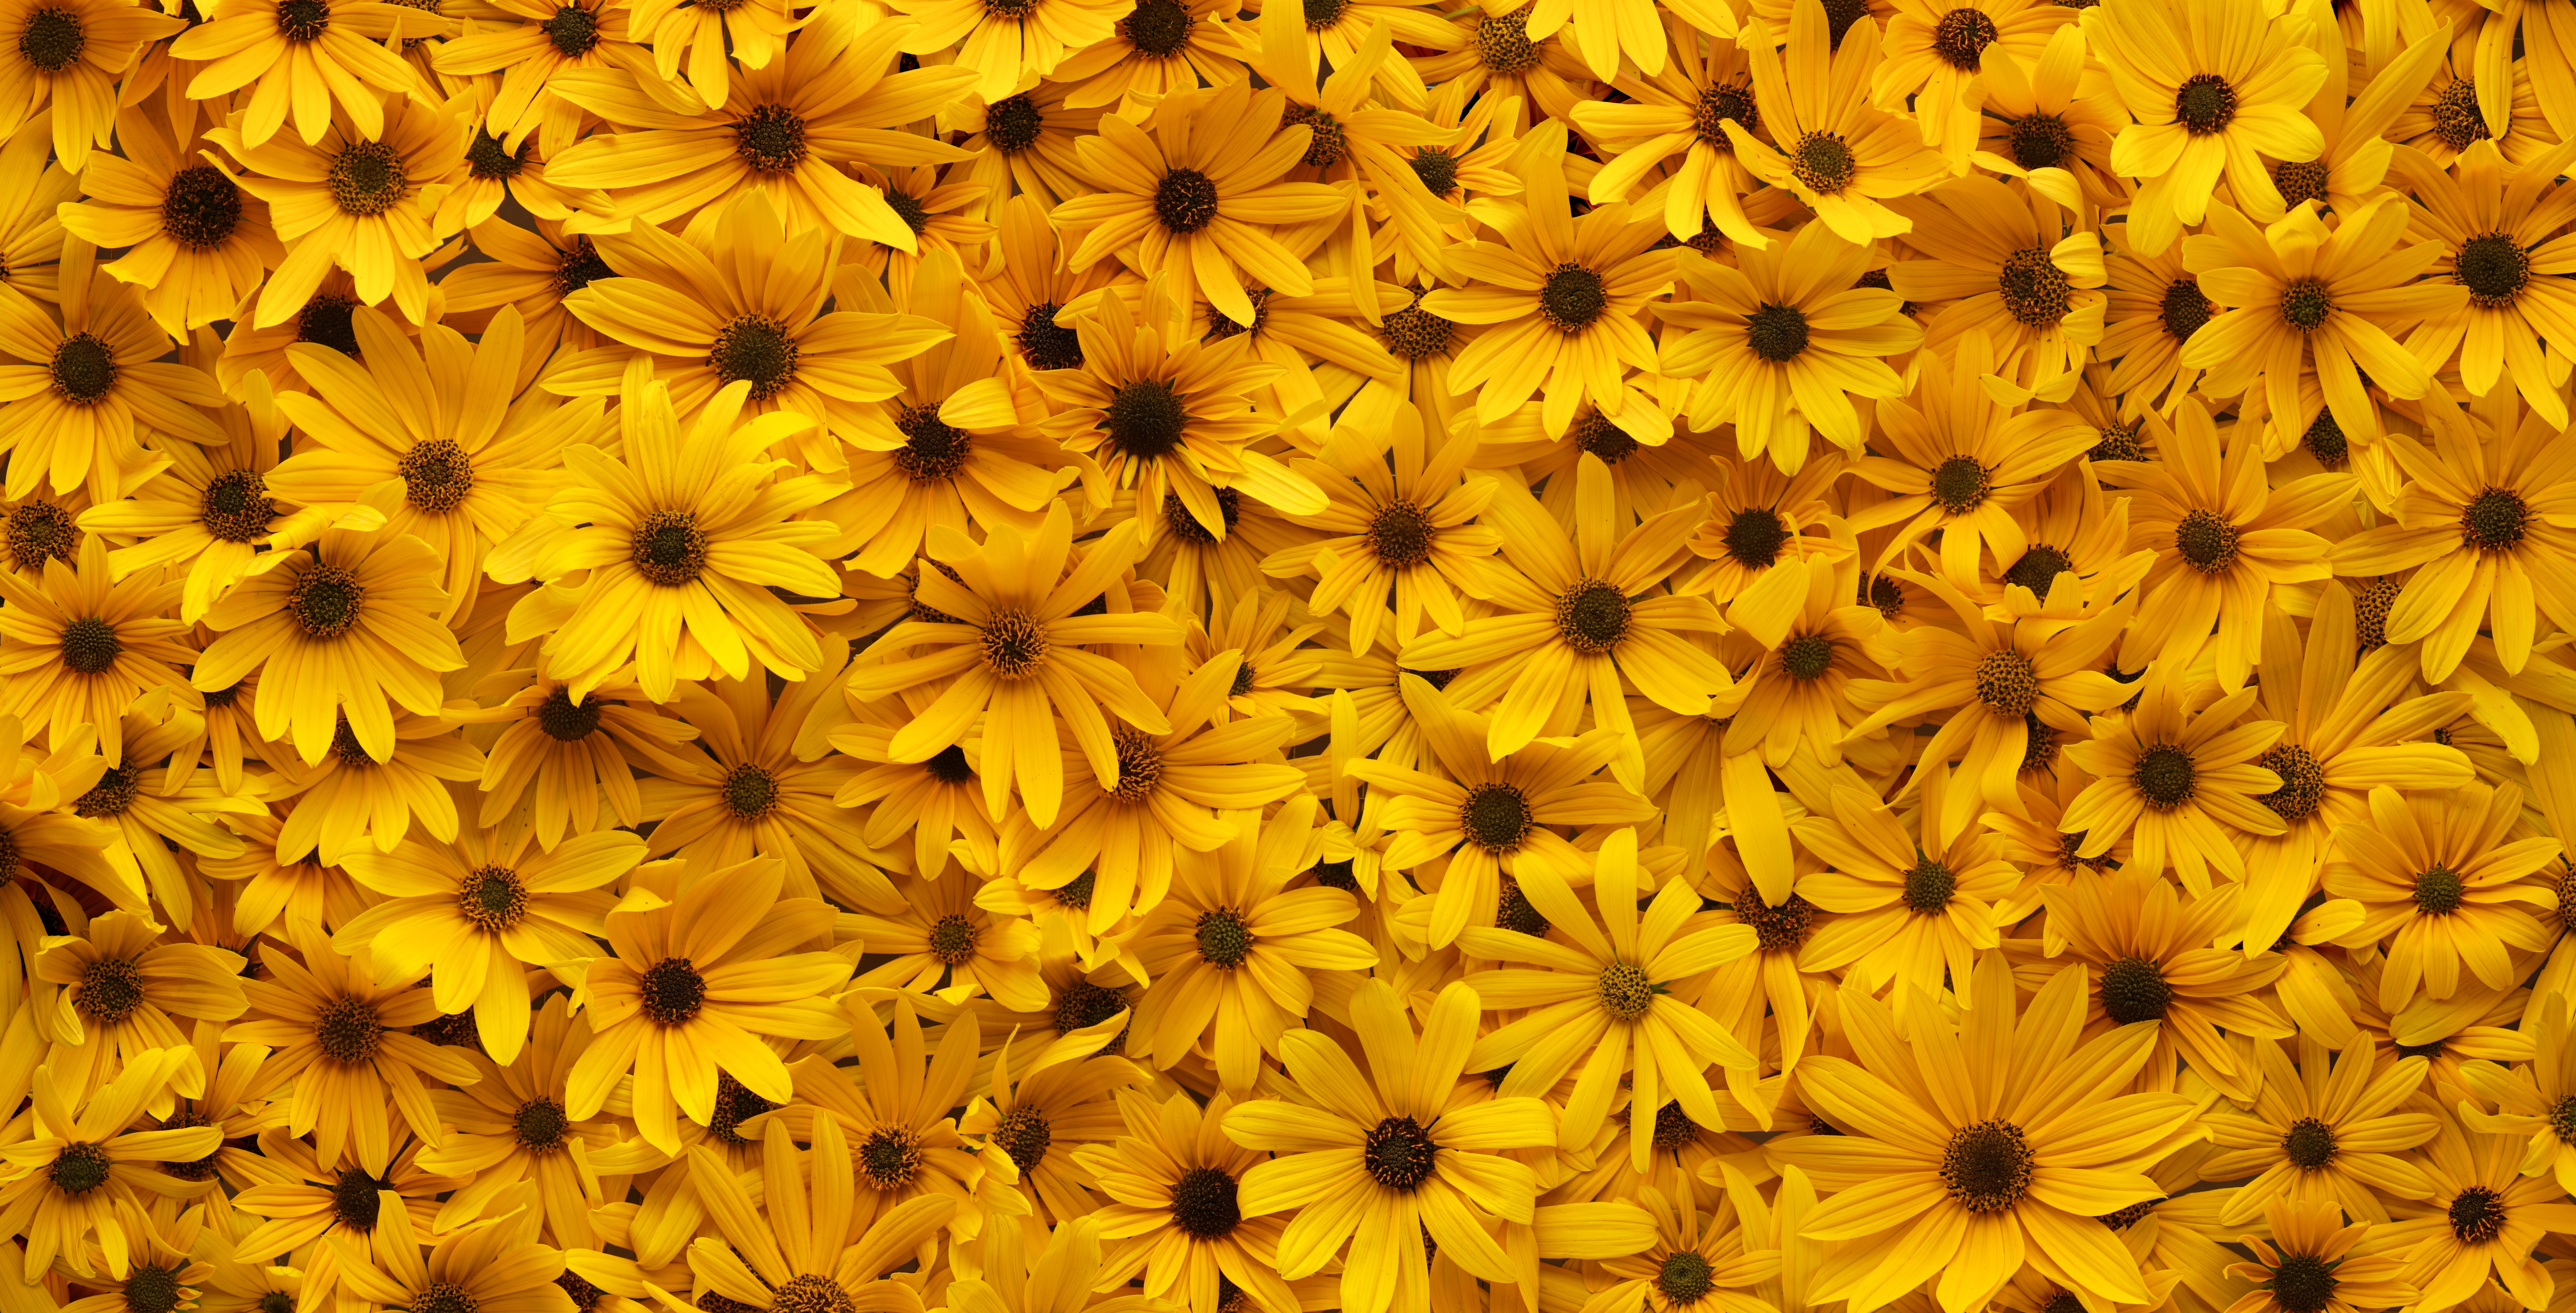 Wall of bright yellow flowers background.